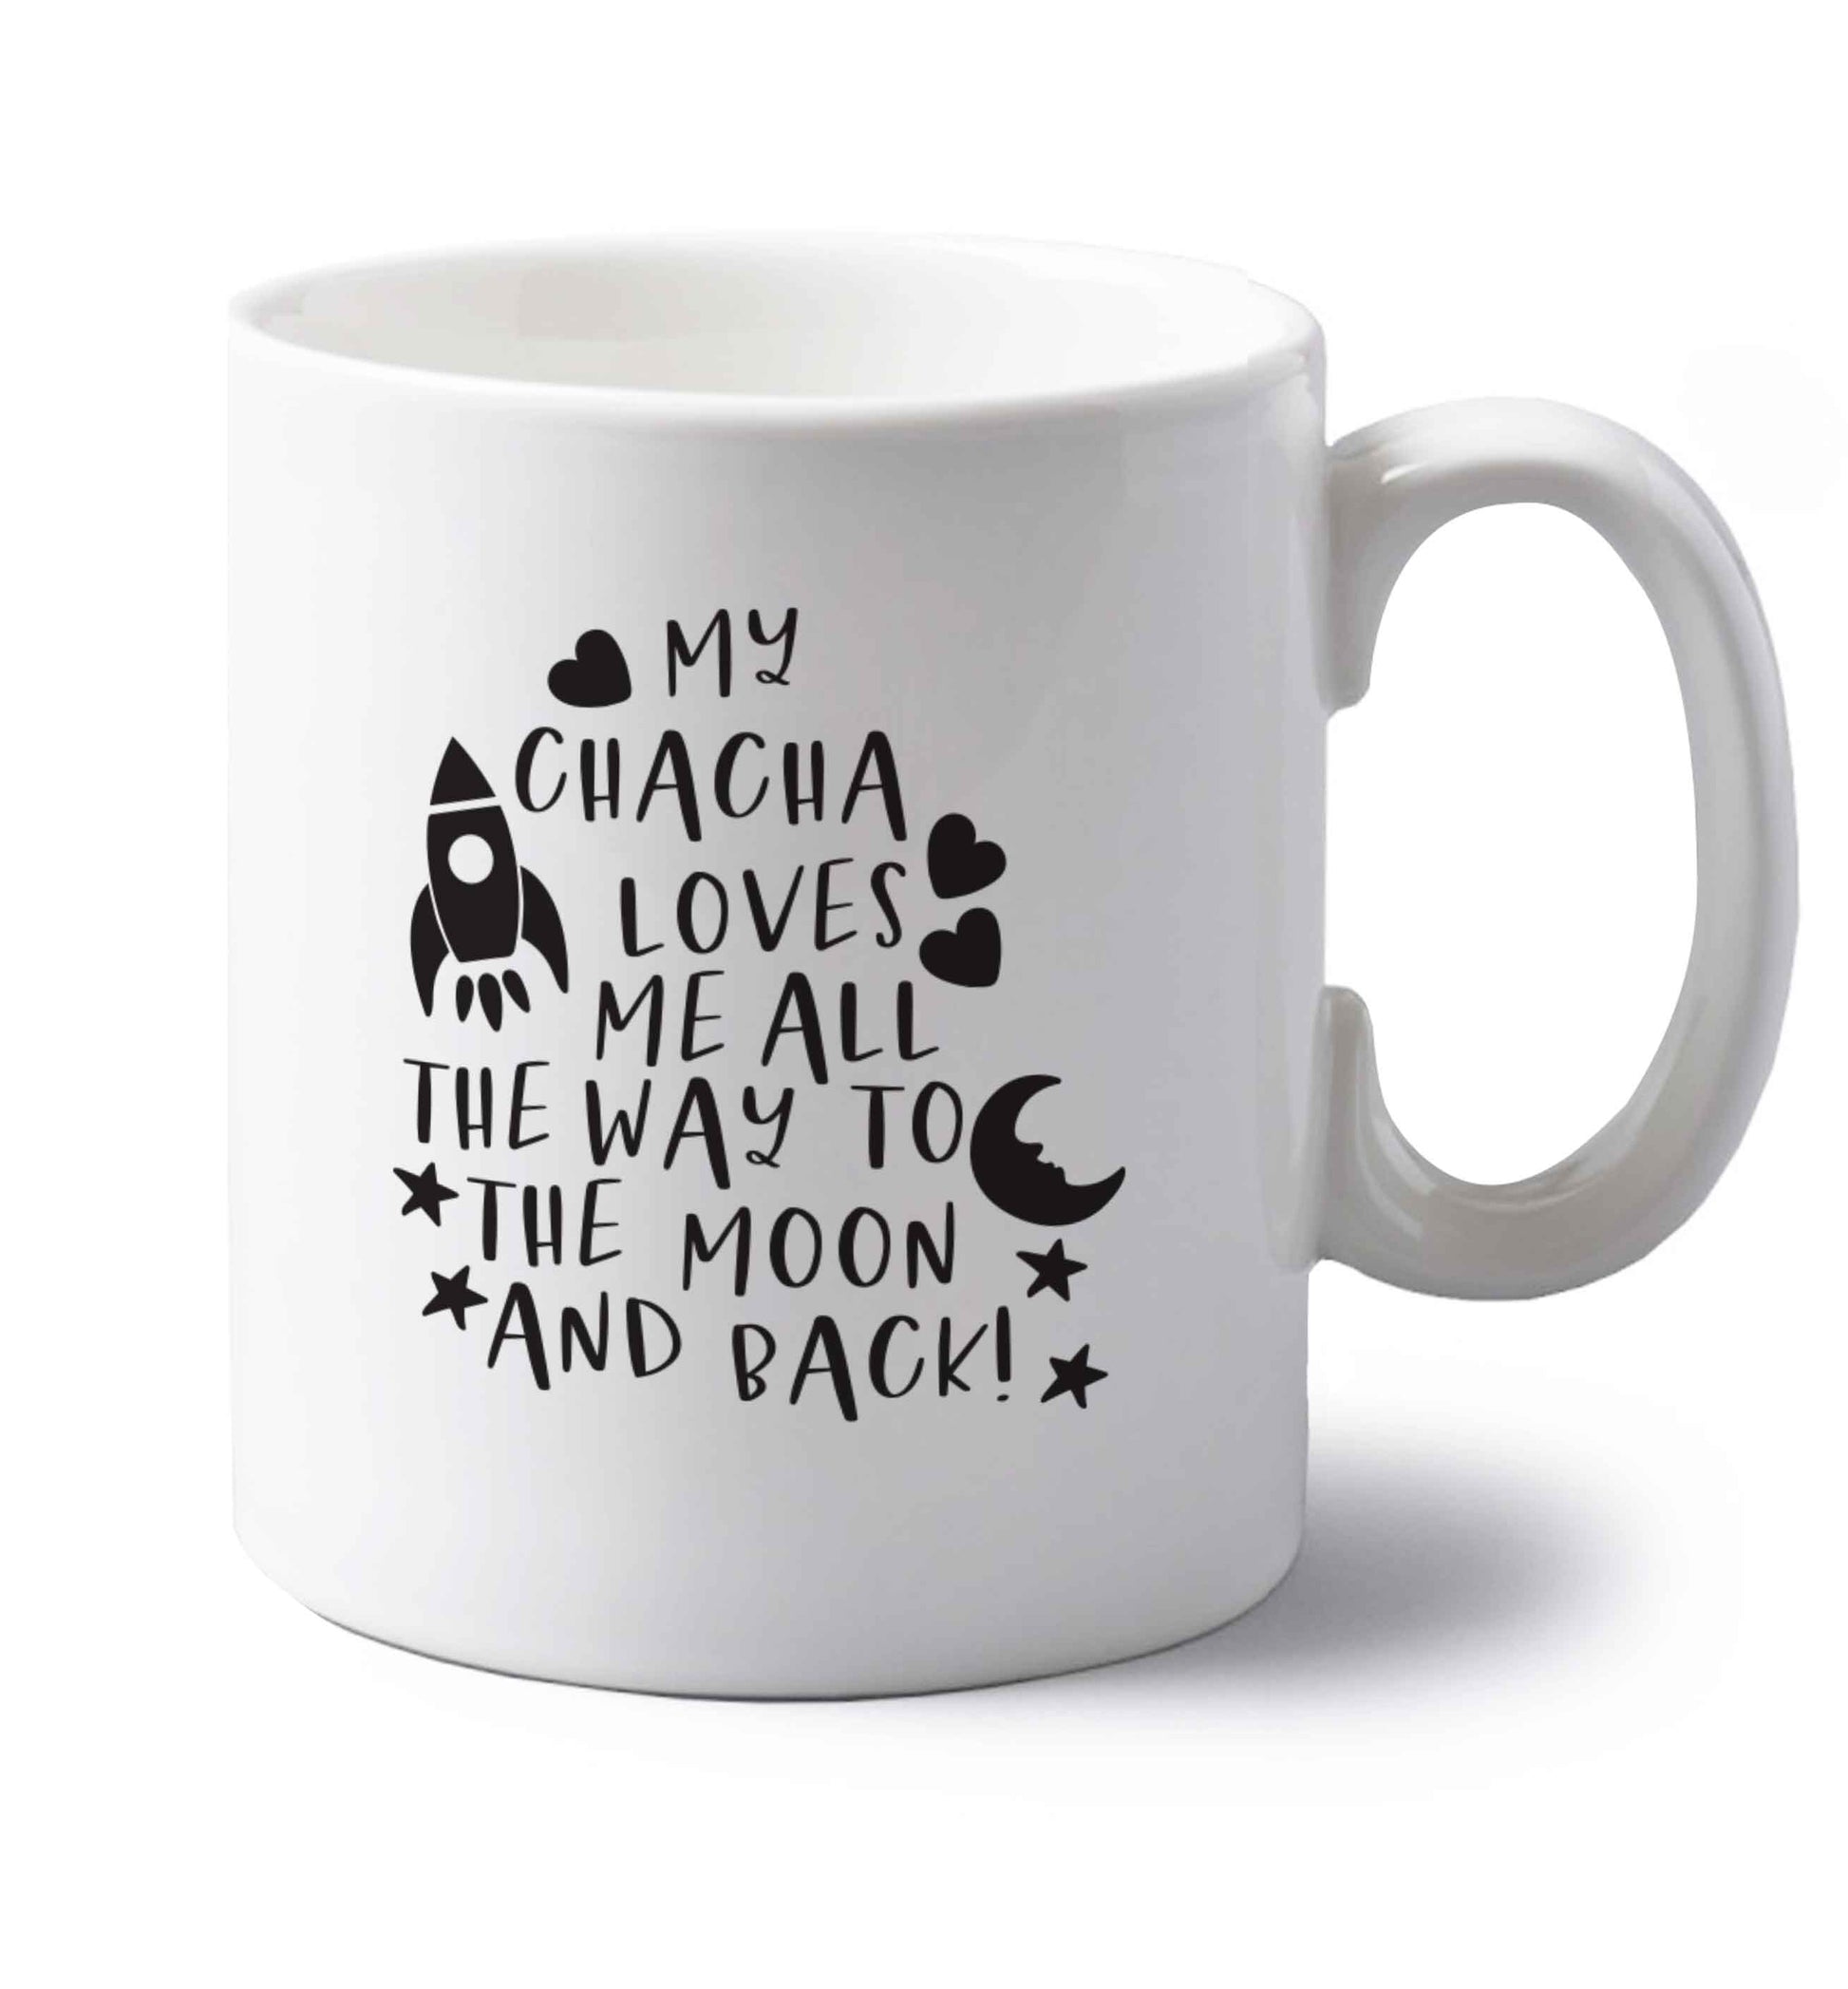 My chacha loves me all the way to the moon and back left handed white ceramic mug 